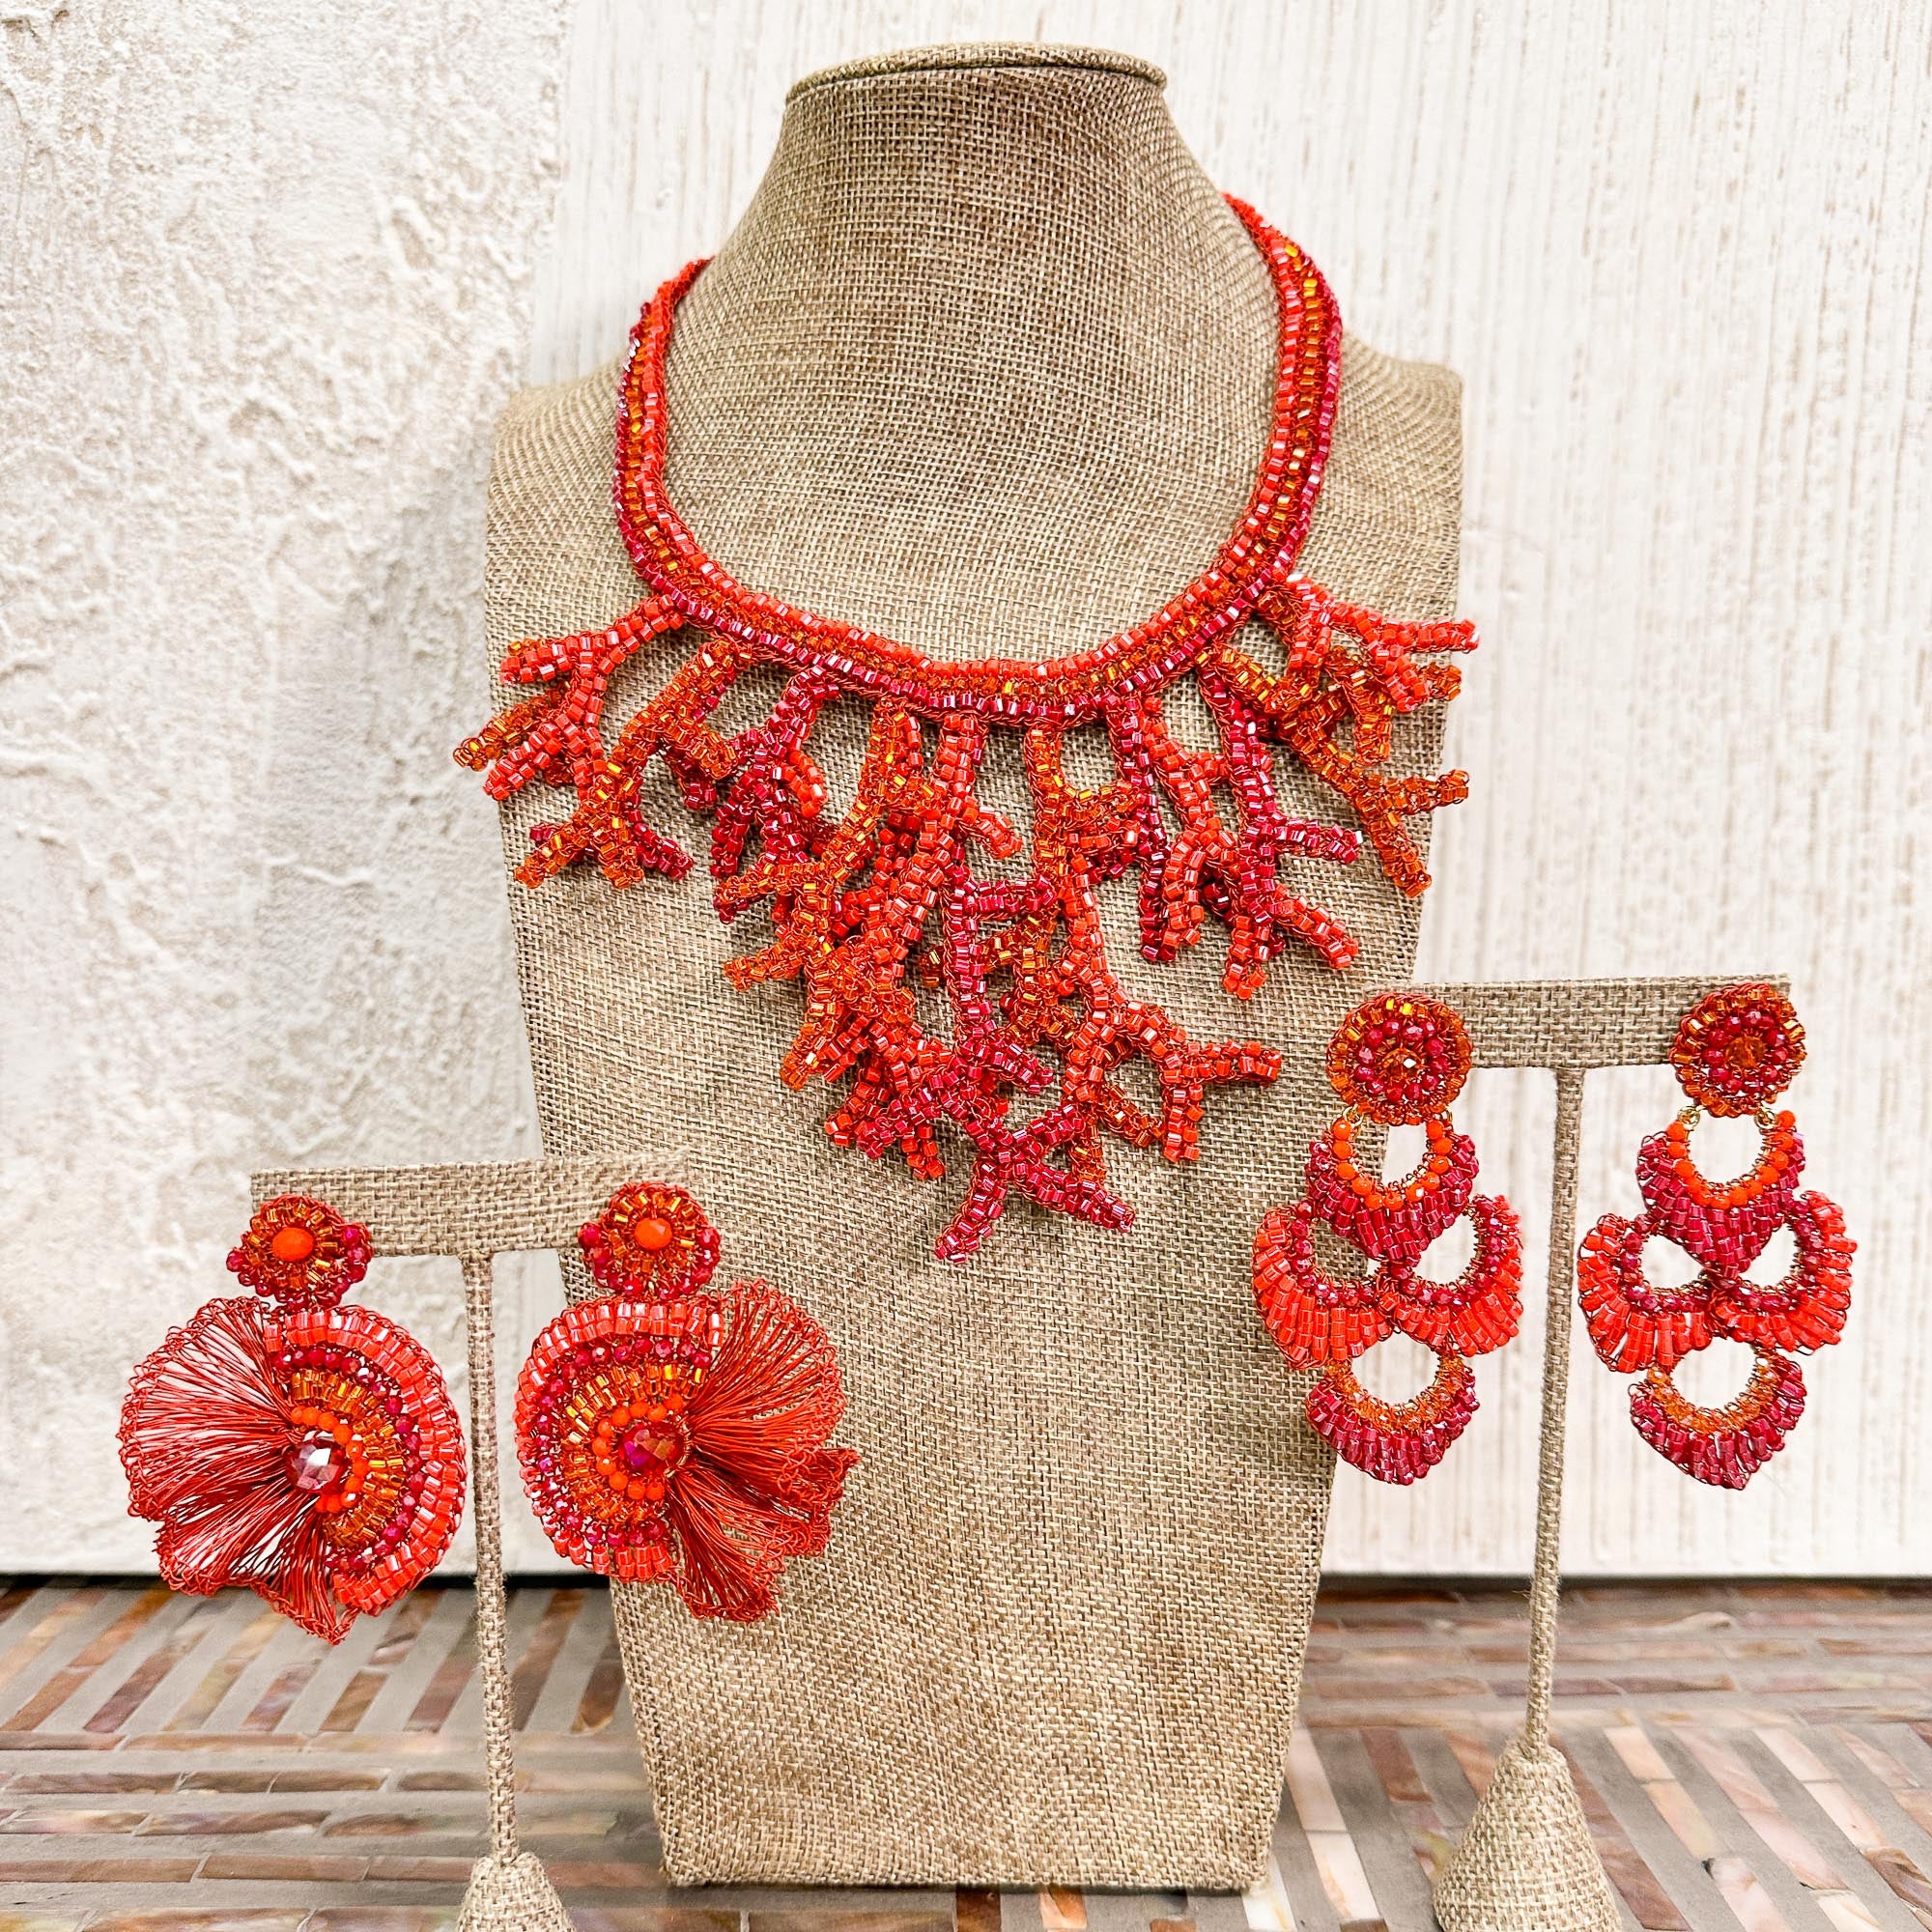 Lavish by Tricia Milaneze Coral Necklace with Matching Earrings